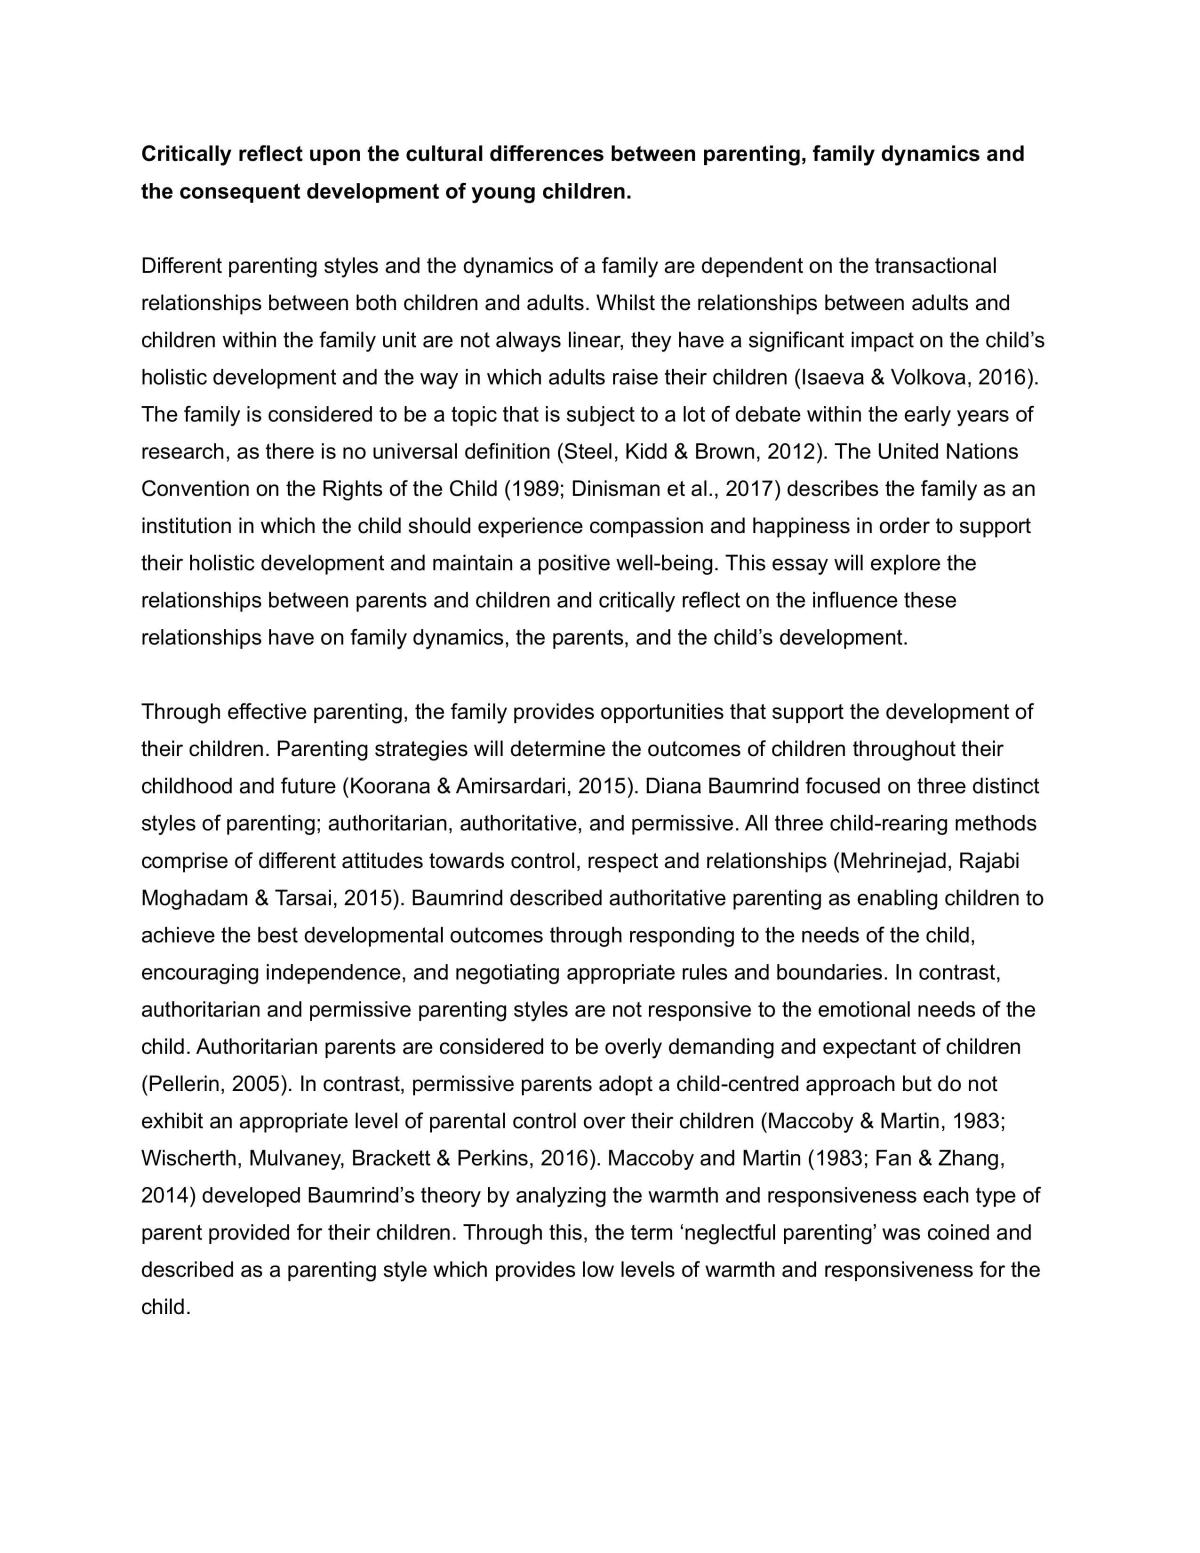 Parenting and Child Development - Cultural Differences - Page 1